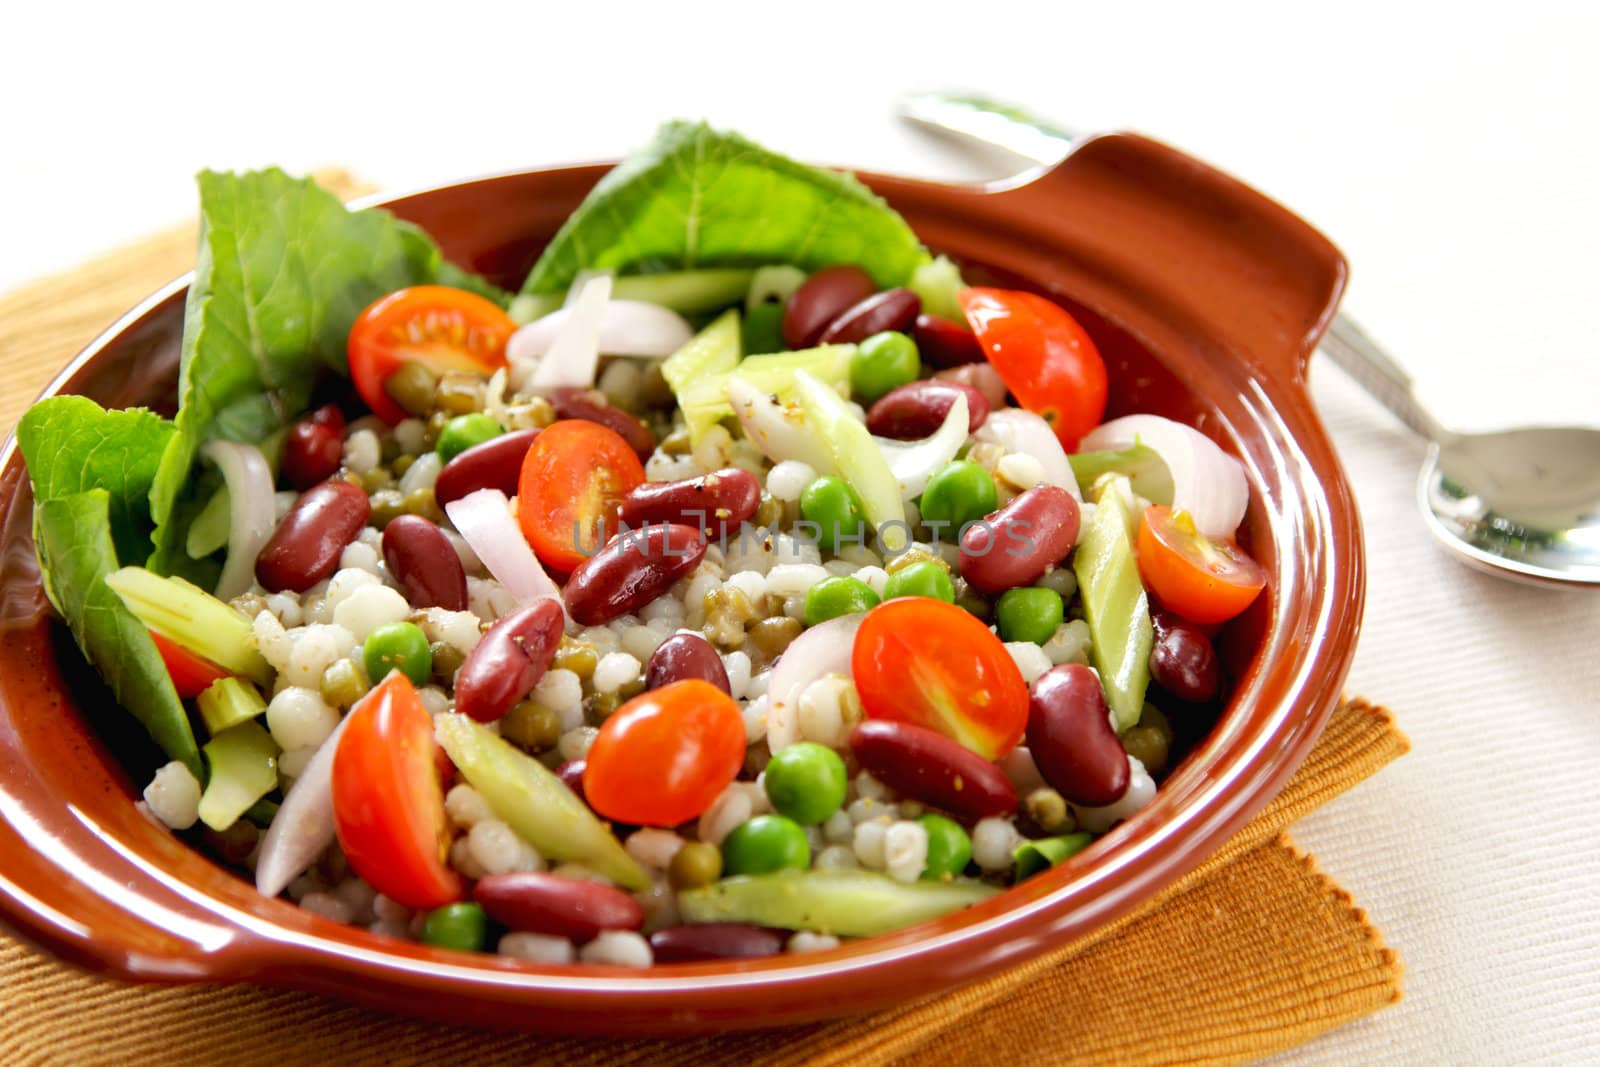 Beans and grains with celery salad